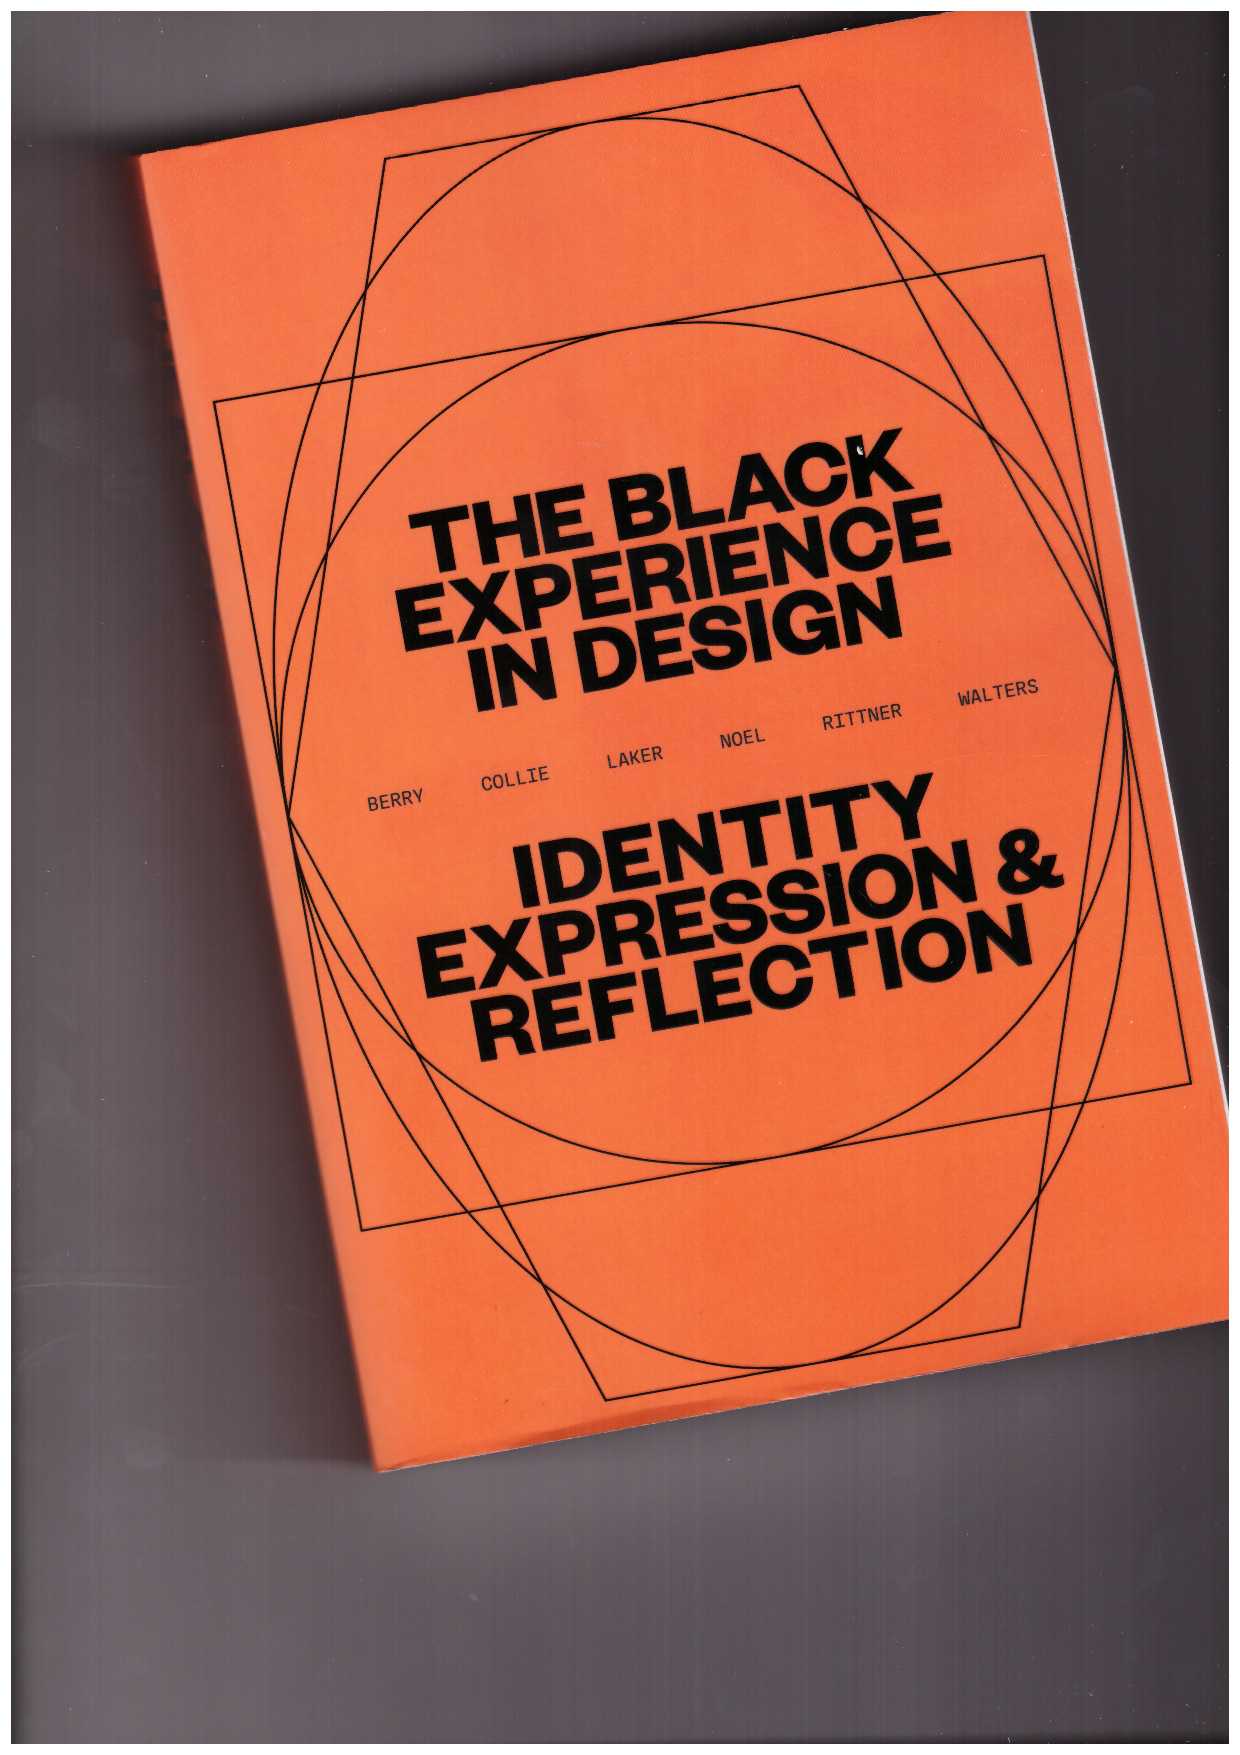 BERRY, Anne H.; COLLIE, Kareem; LAKER, Penina Acayo ; NOEL, Lesley-Ann ; RITTNER, Jen; WALTERS, Kelly (eds.) - The Black Experience in Design: Identity, Expression & Reflection